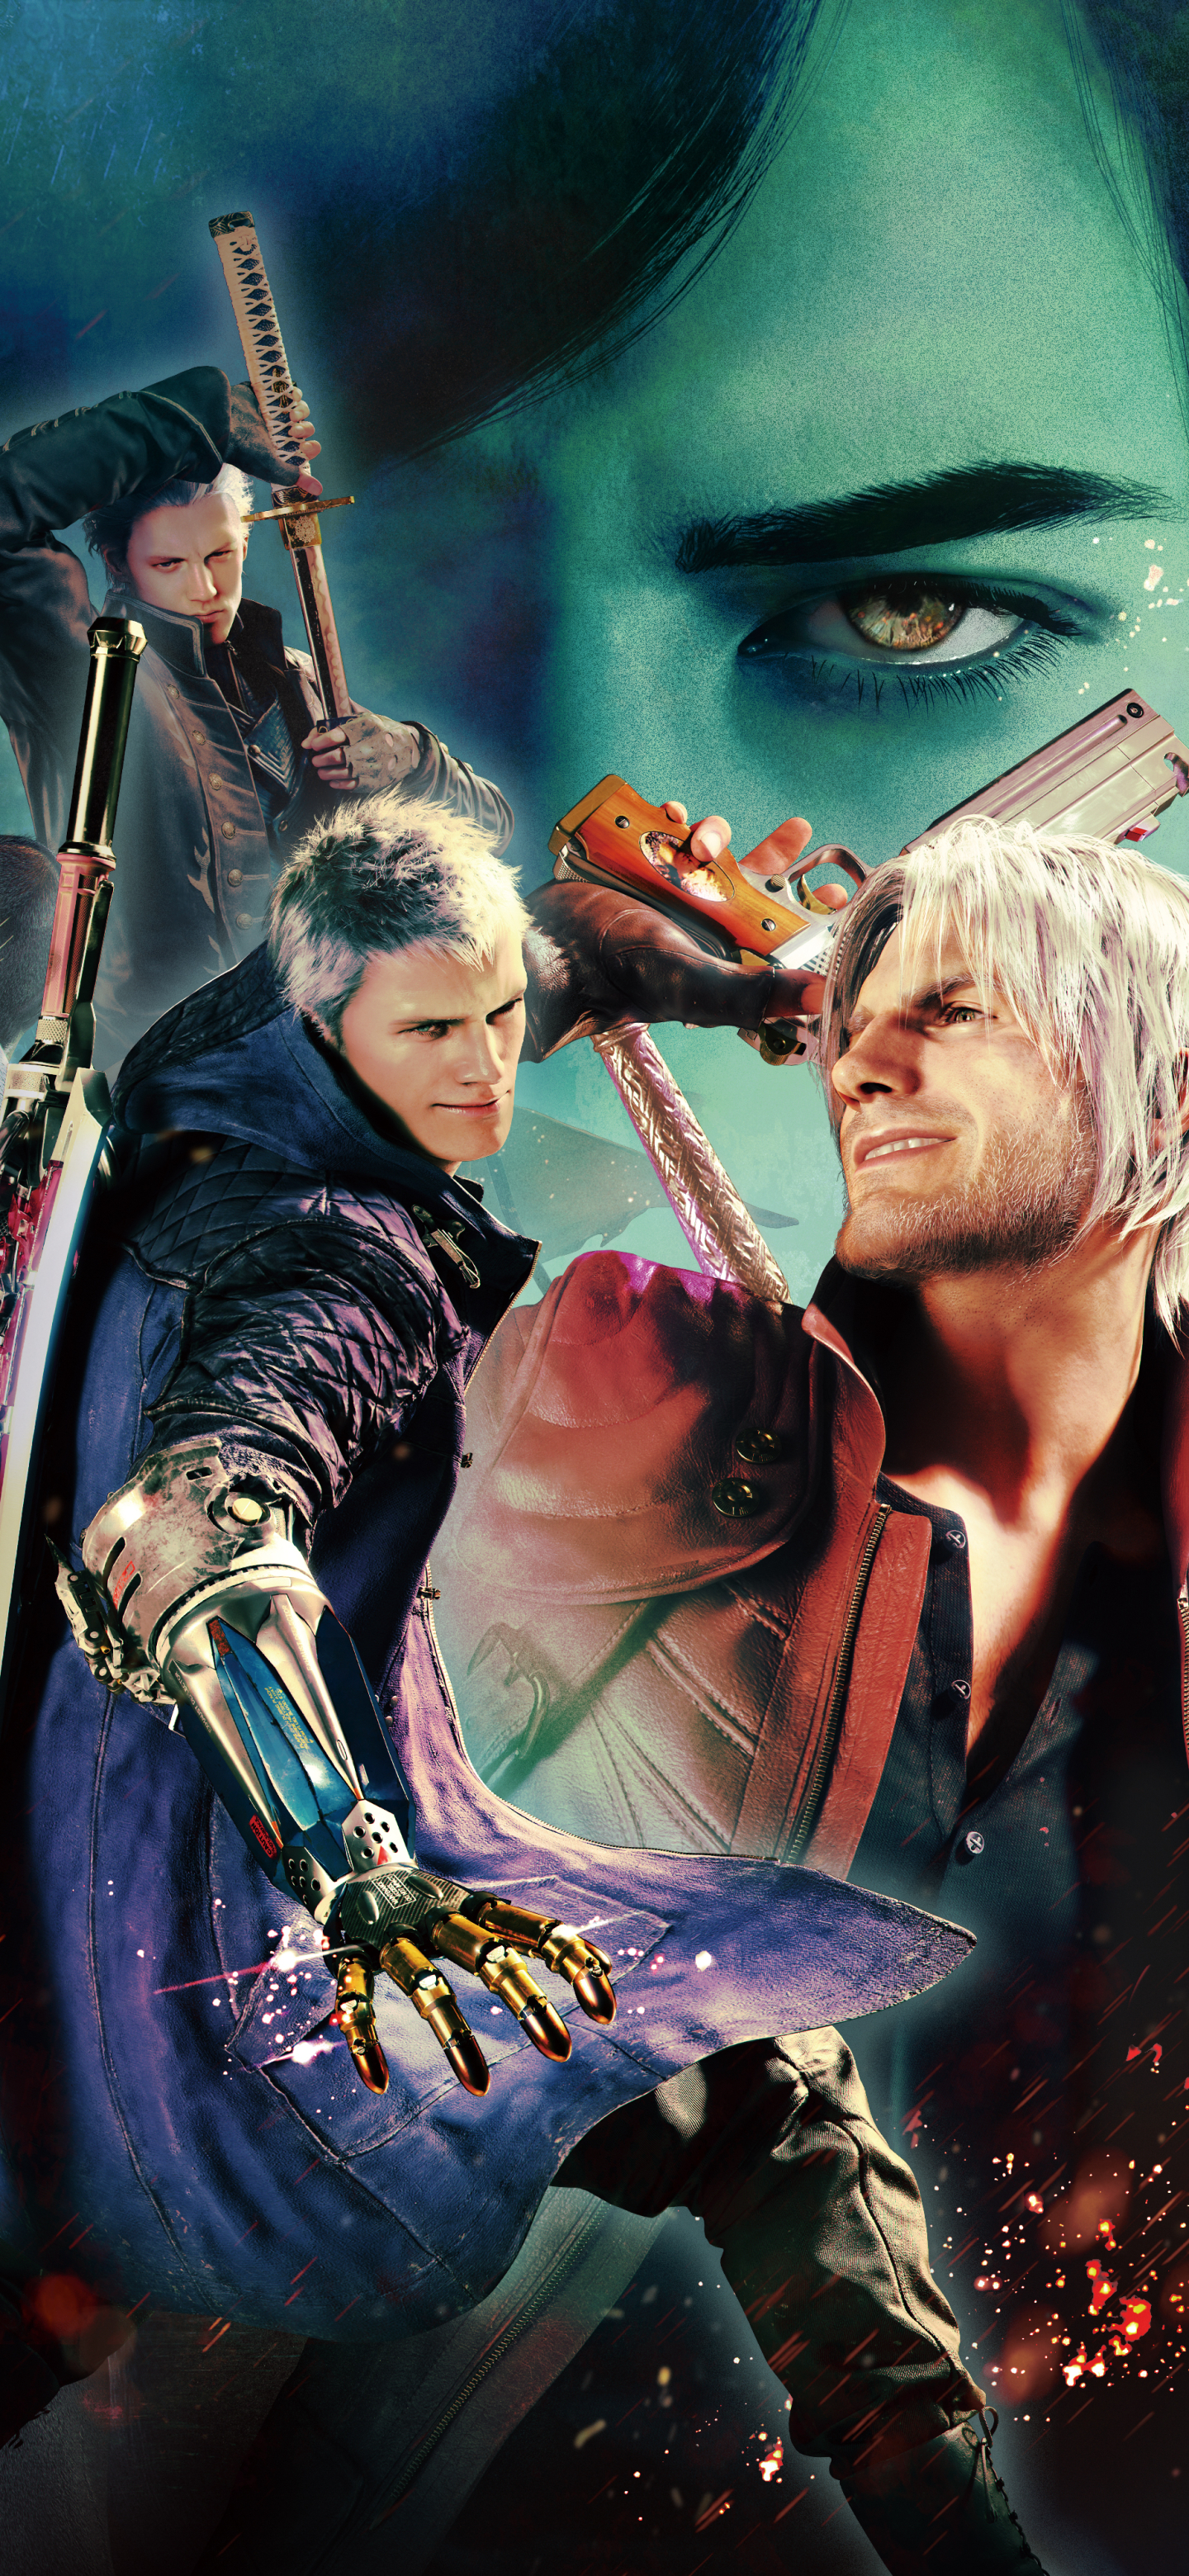 video game, devil may cry 5 special edition, dante (devil may cry), vergil (devil may cry), nero (devil may cry), devil may cry, devil may cry 5, v (devil may cry)